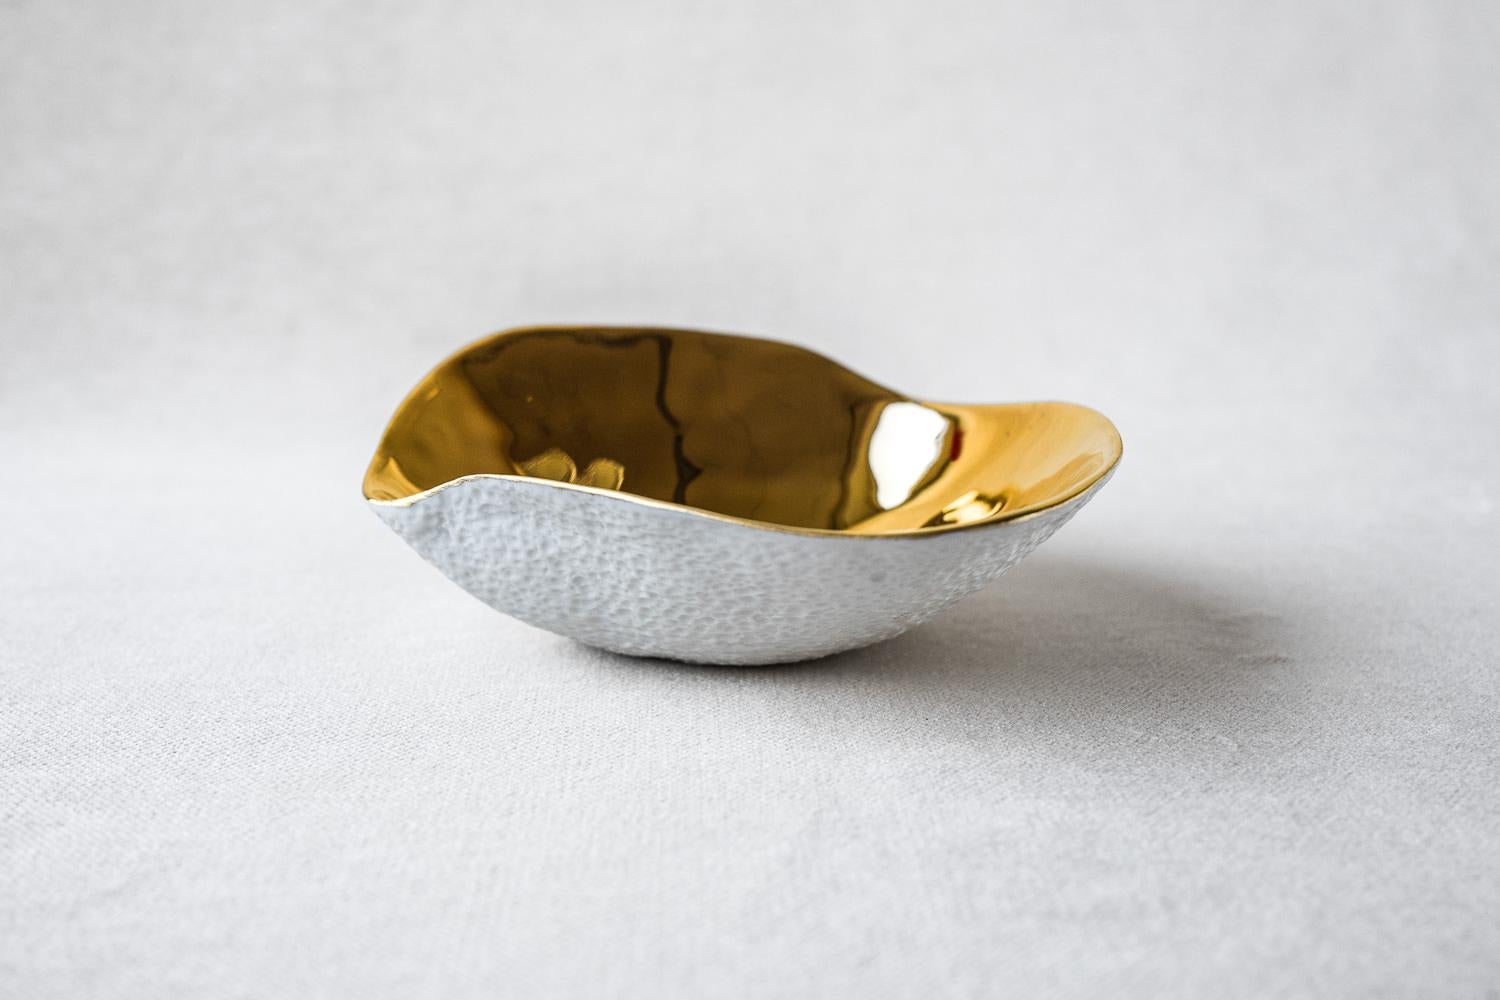 • set of 4 small porcelain side dishes
• 10,5cm x 11cm x 4,7cm each
• more like a piece of jewellery for your home
• perfect for a sexy amuse-bouche, a pre-dessert or side dish
• also works for those precious chocolates
• very luxurious hand